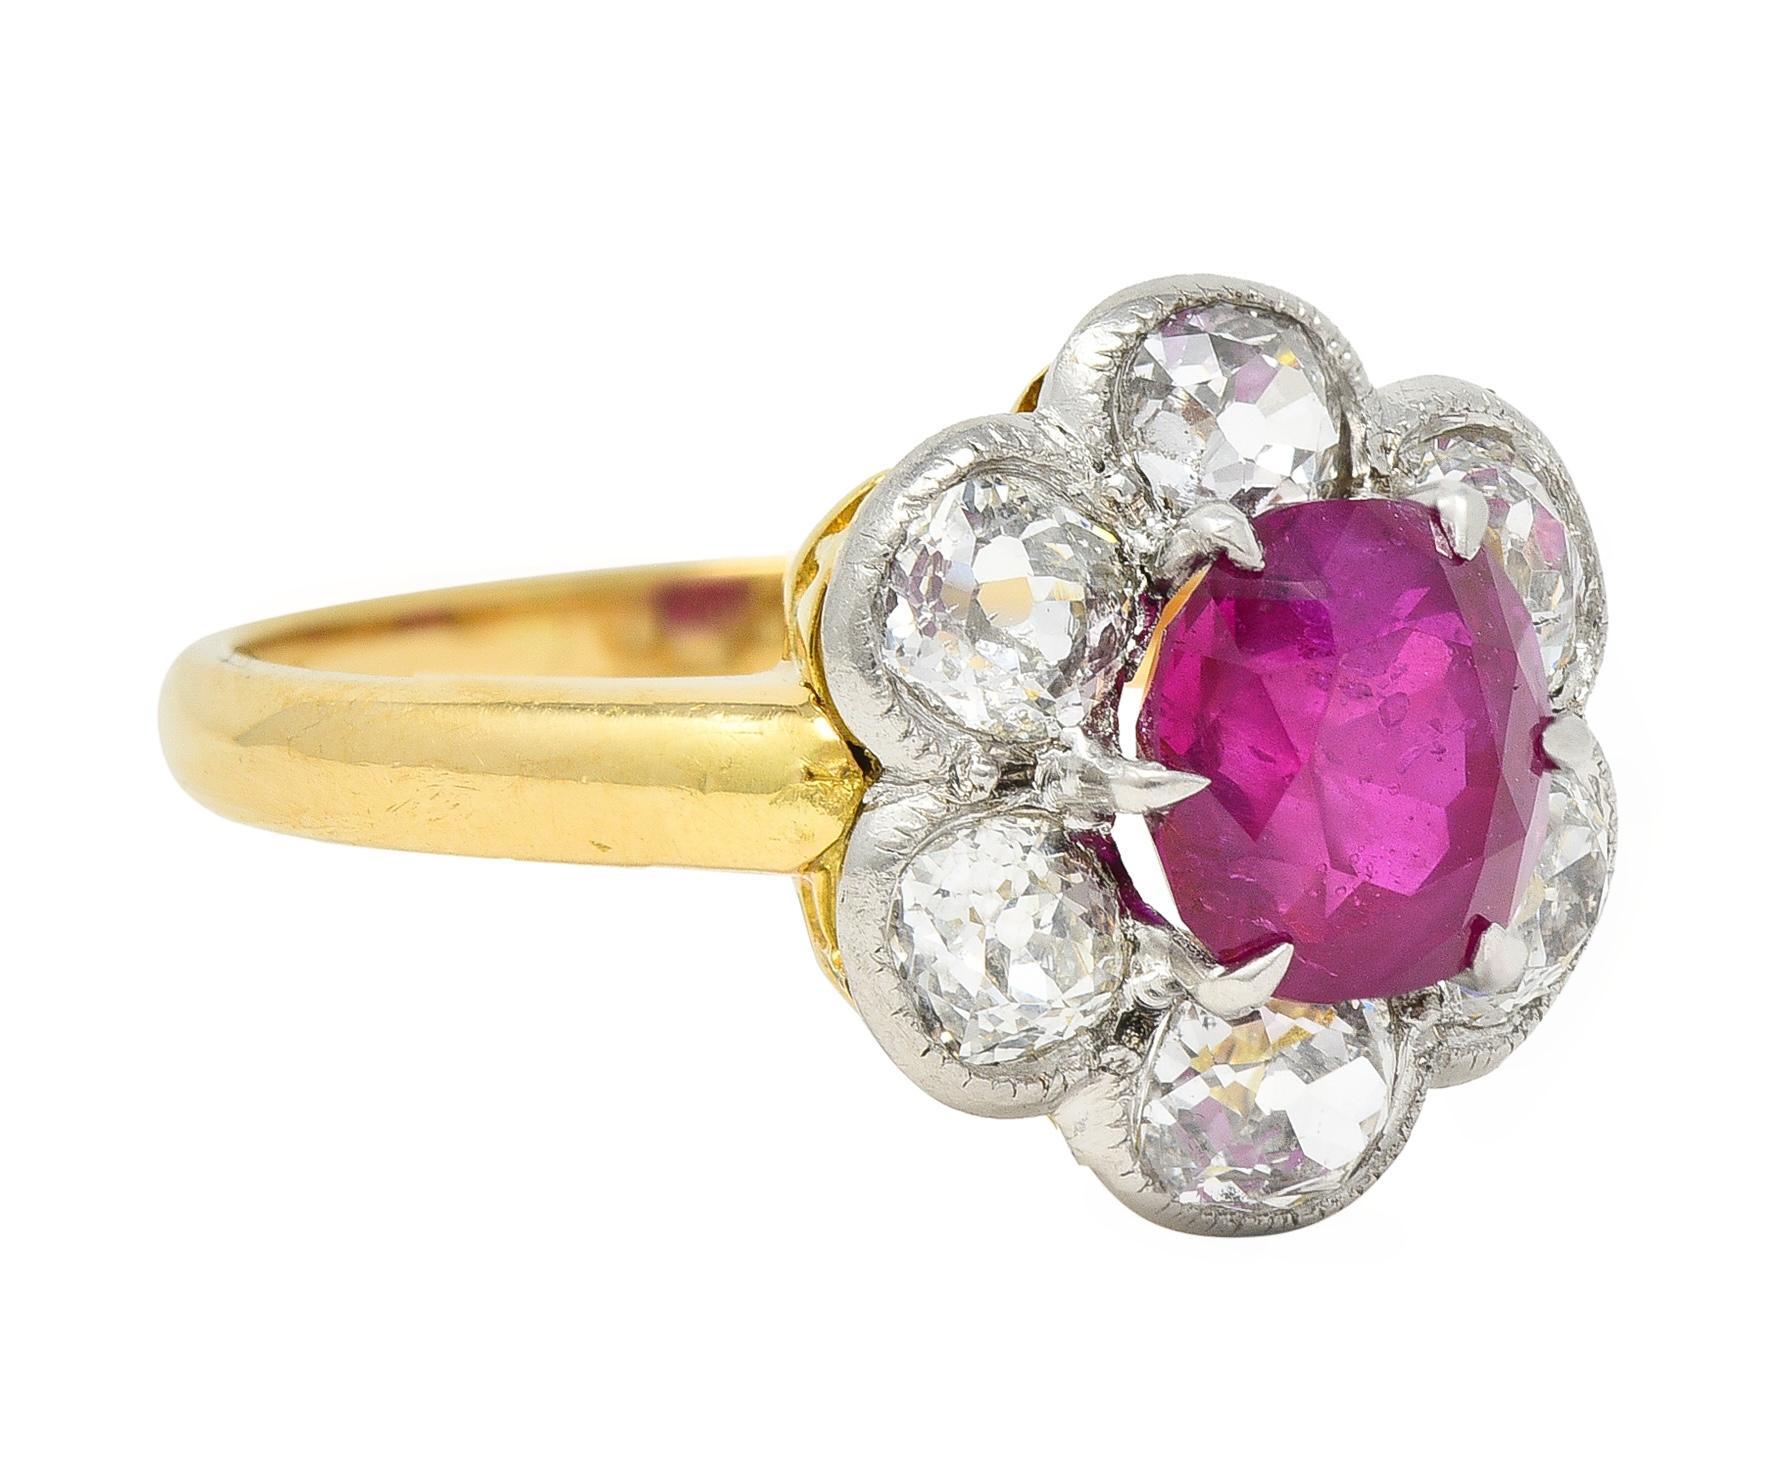 Centering a cushion cut ruby weighing 1.89 carats - transparent bright purplish red in color 
Prong set and natural Burmese in origin with no indications of heat treatment
With a halo surround of bezel set old mine cut diamonds 
Weighing